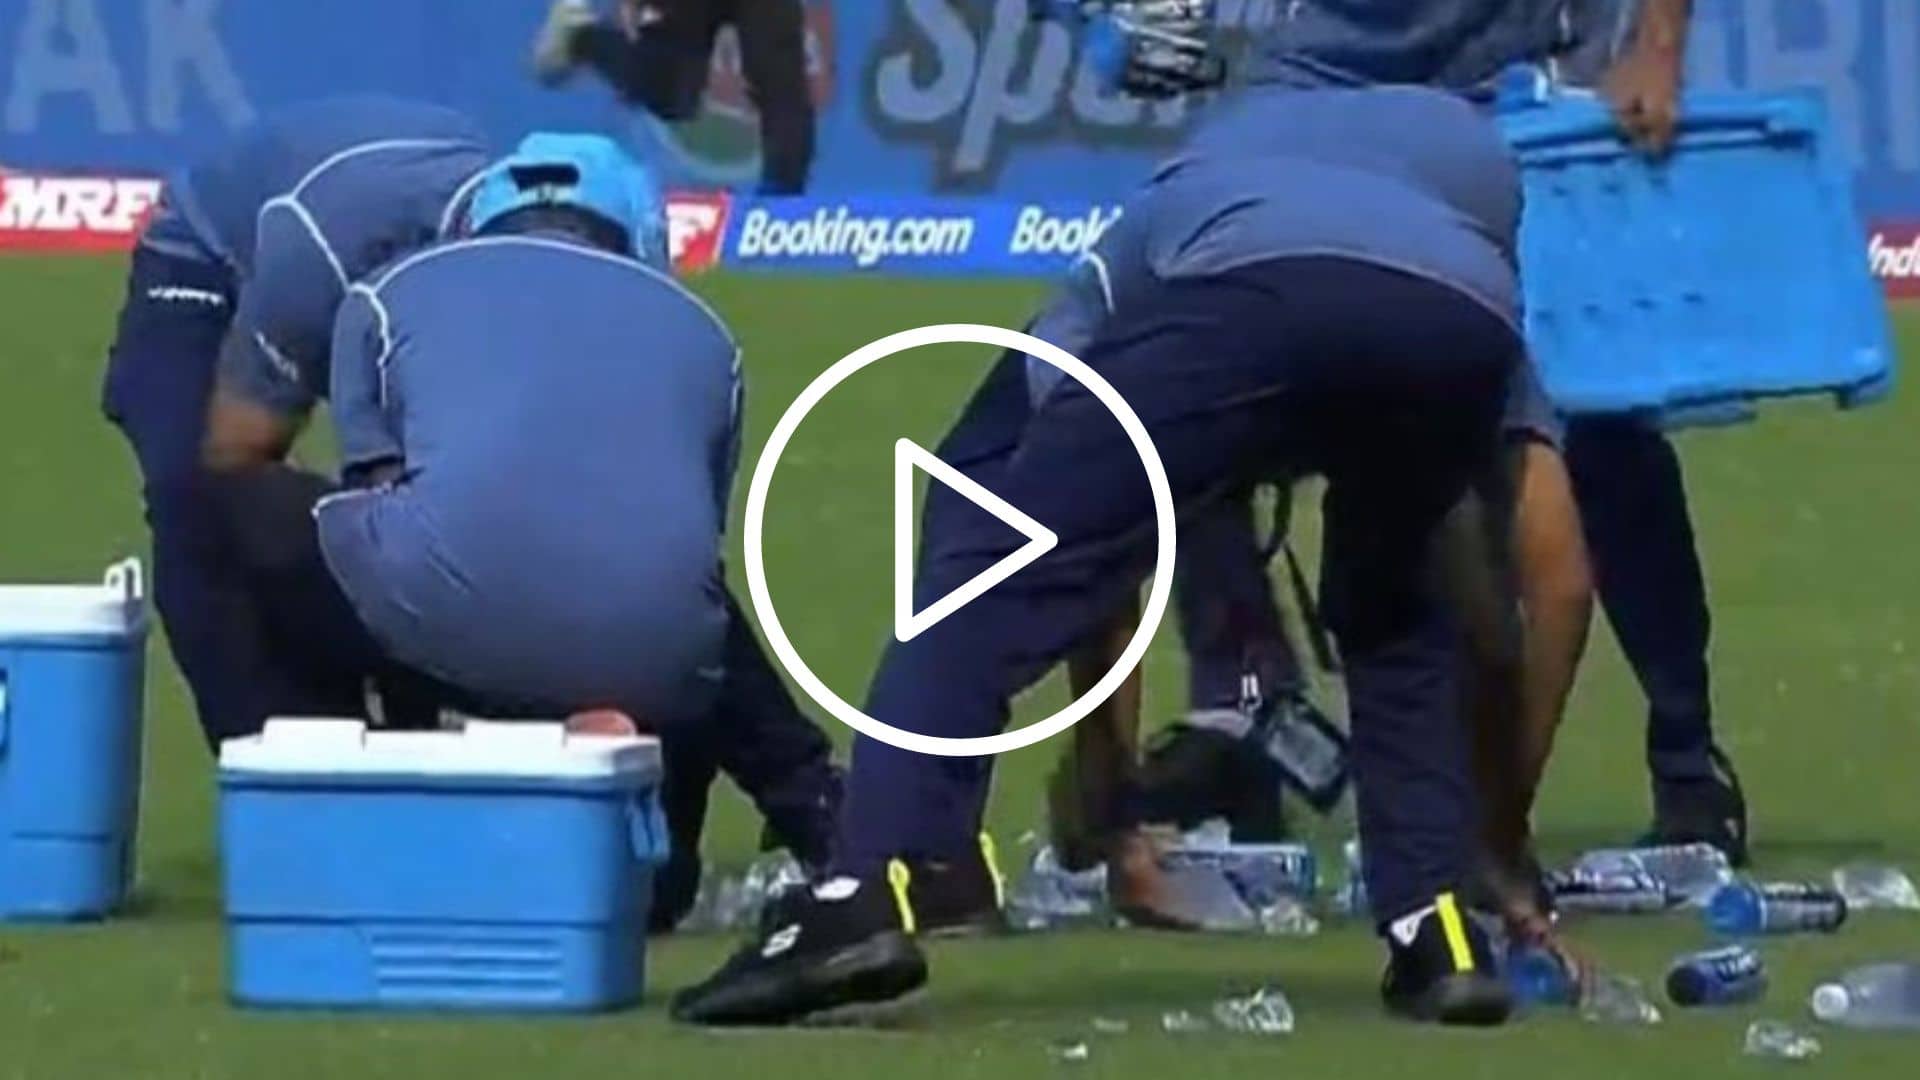 [Watch] Mumbai Groundkeepers 'OOPS' Moment In Wankhede Stadium During ENG Vs SA